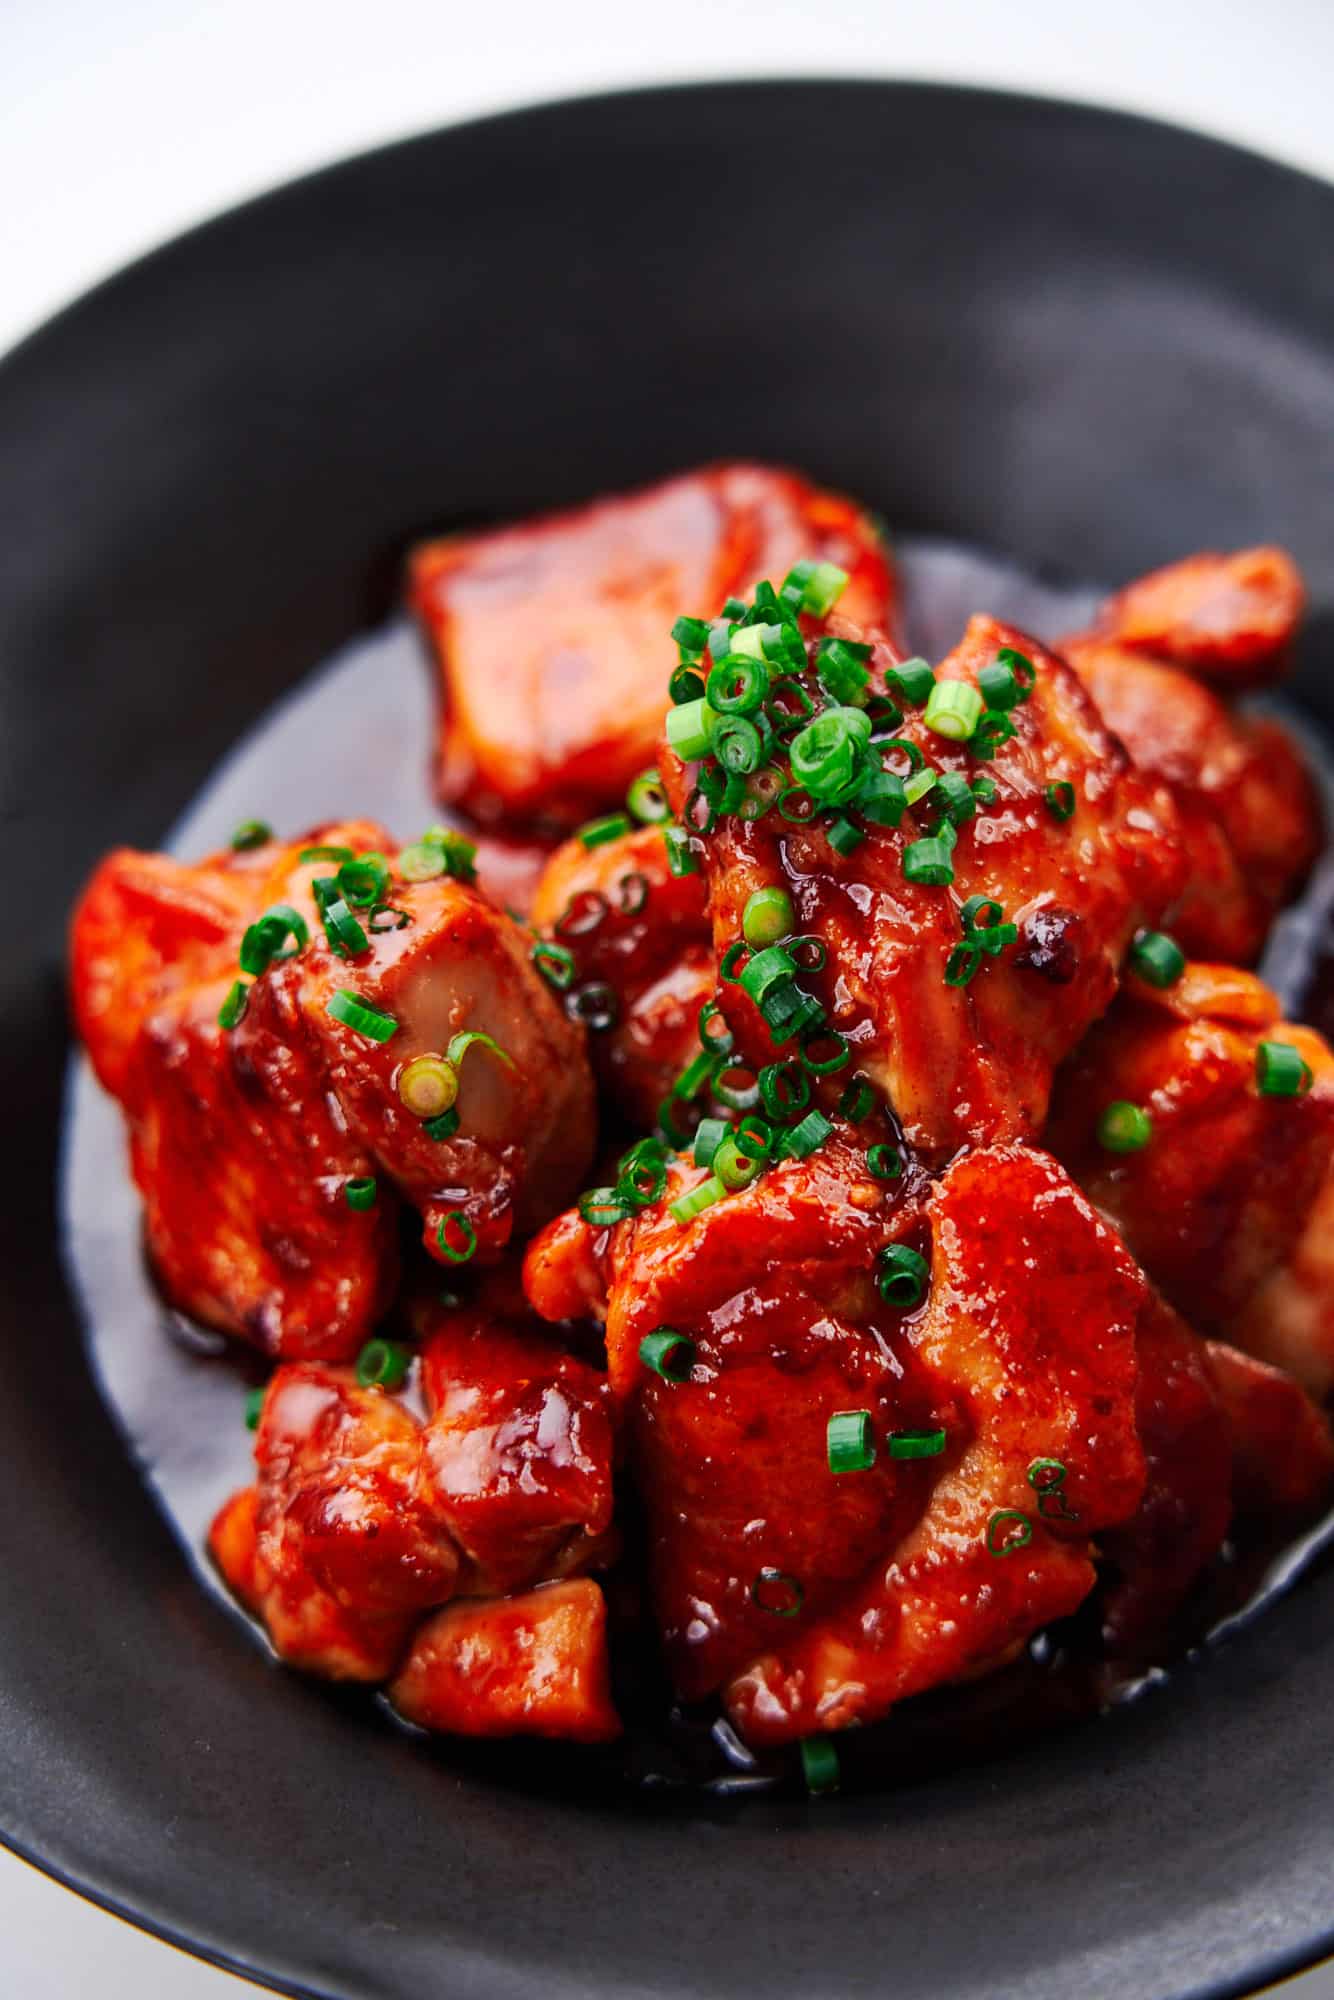 Juicy chunks of chicken thigh glazed in sweet and spicy gochujang sauce.